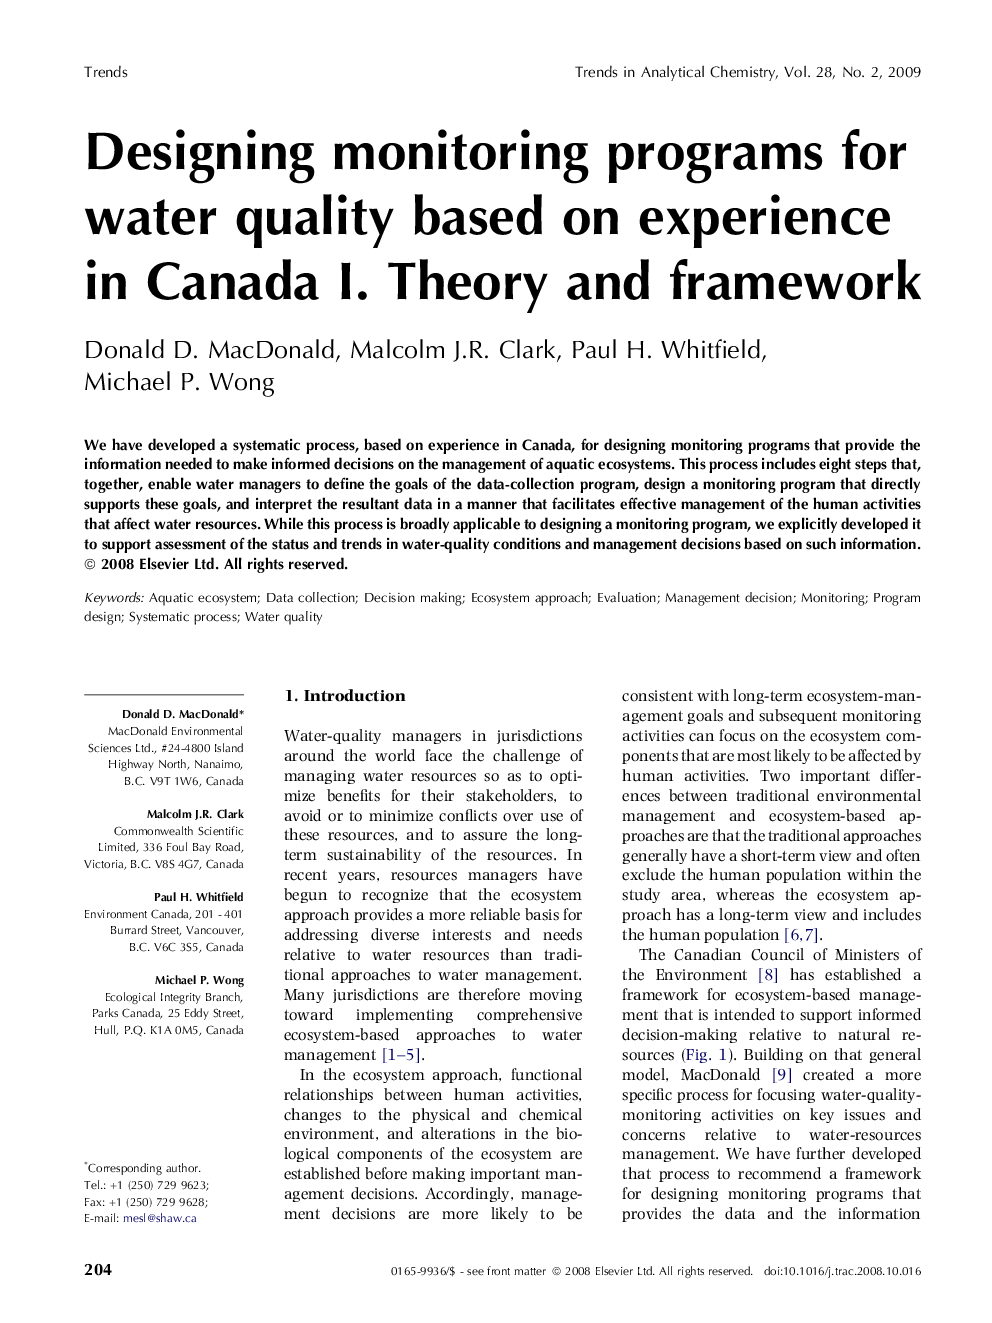 Designing monitoring programs for water quality based on experience in Canada I. Theory and framework